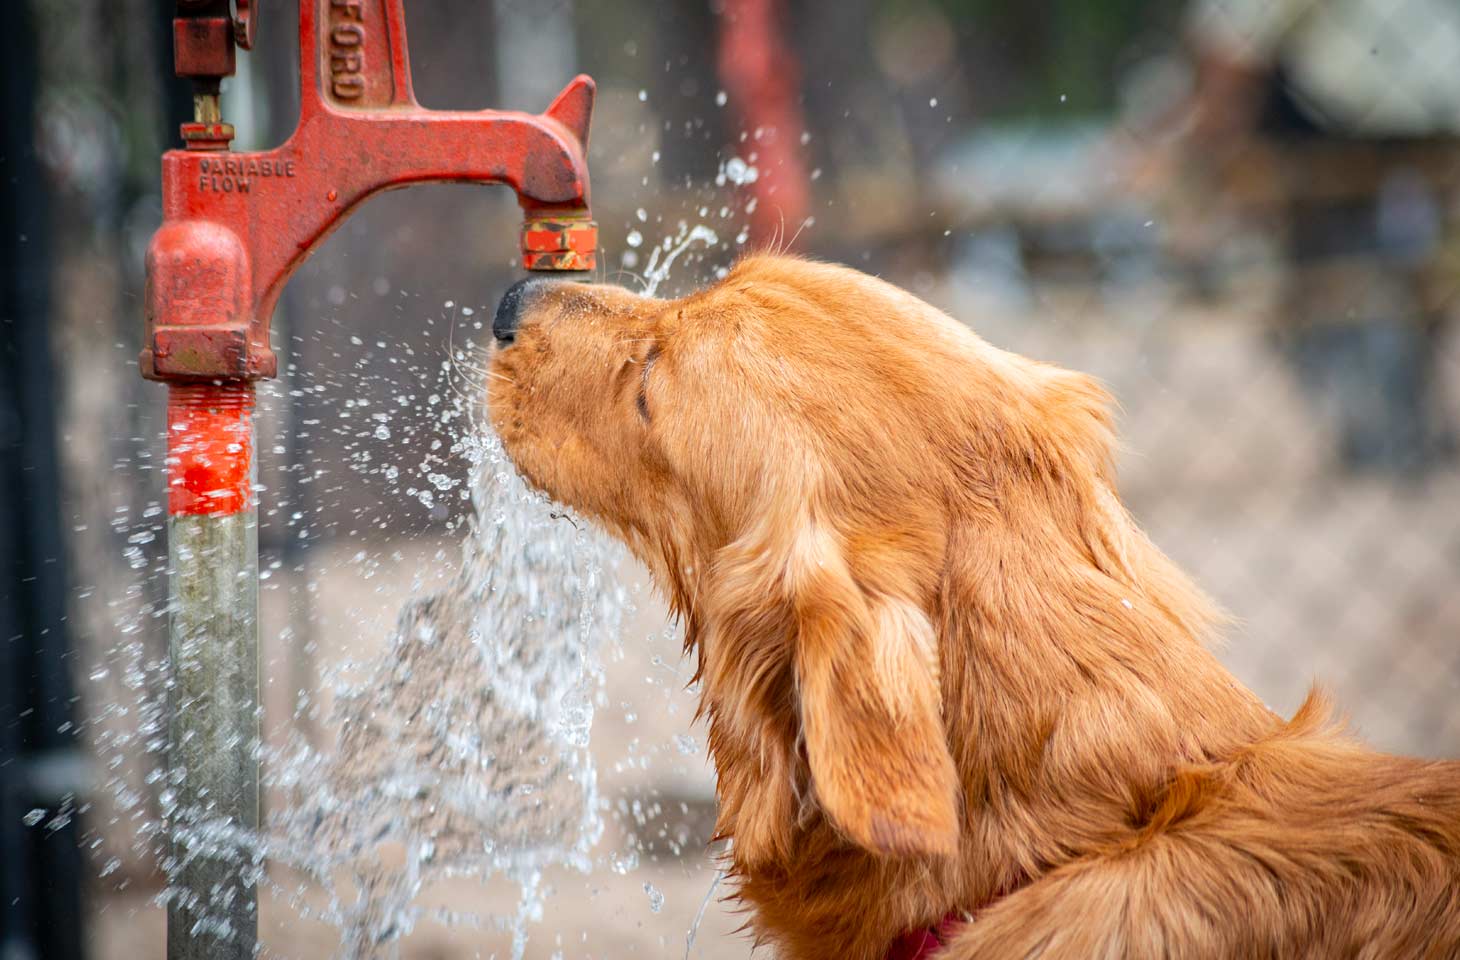 Your dog prefers running water